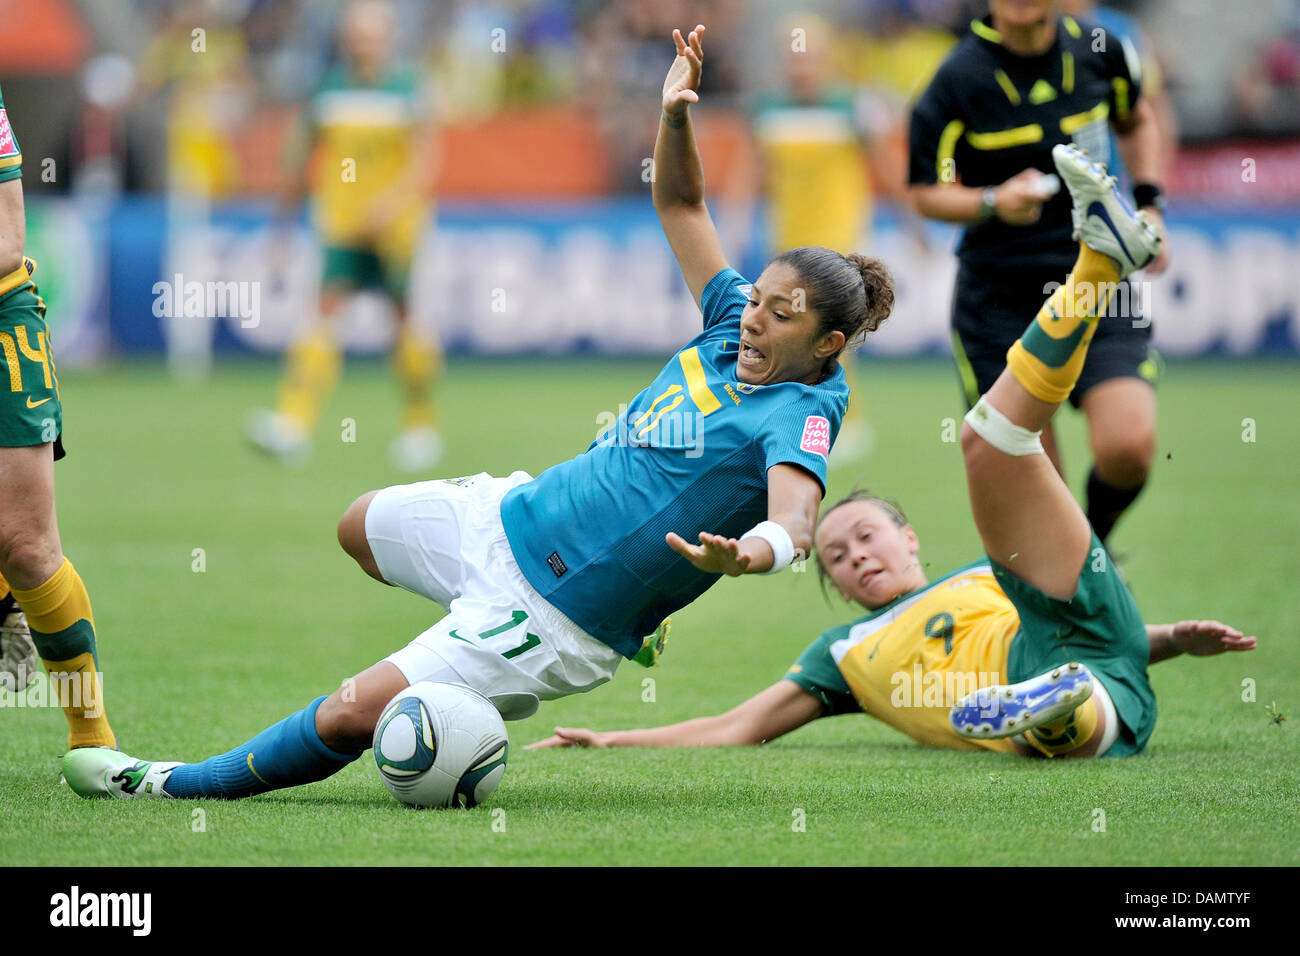 Cristiane (L) of Brazil and Caitlin Foord of Australia fight for the ball during the Group D match Brazil against Australia of FIFA Women's World Cup soccer tournament at the Borussia Park Stadium in Moenchengladbach, Germany, 29 June 2011. Photo: Marius Becker dpa/lnw  +++(c) dpa - Bildfunk+++ Stock Photo